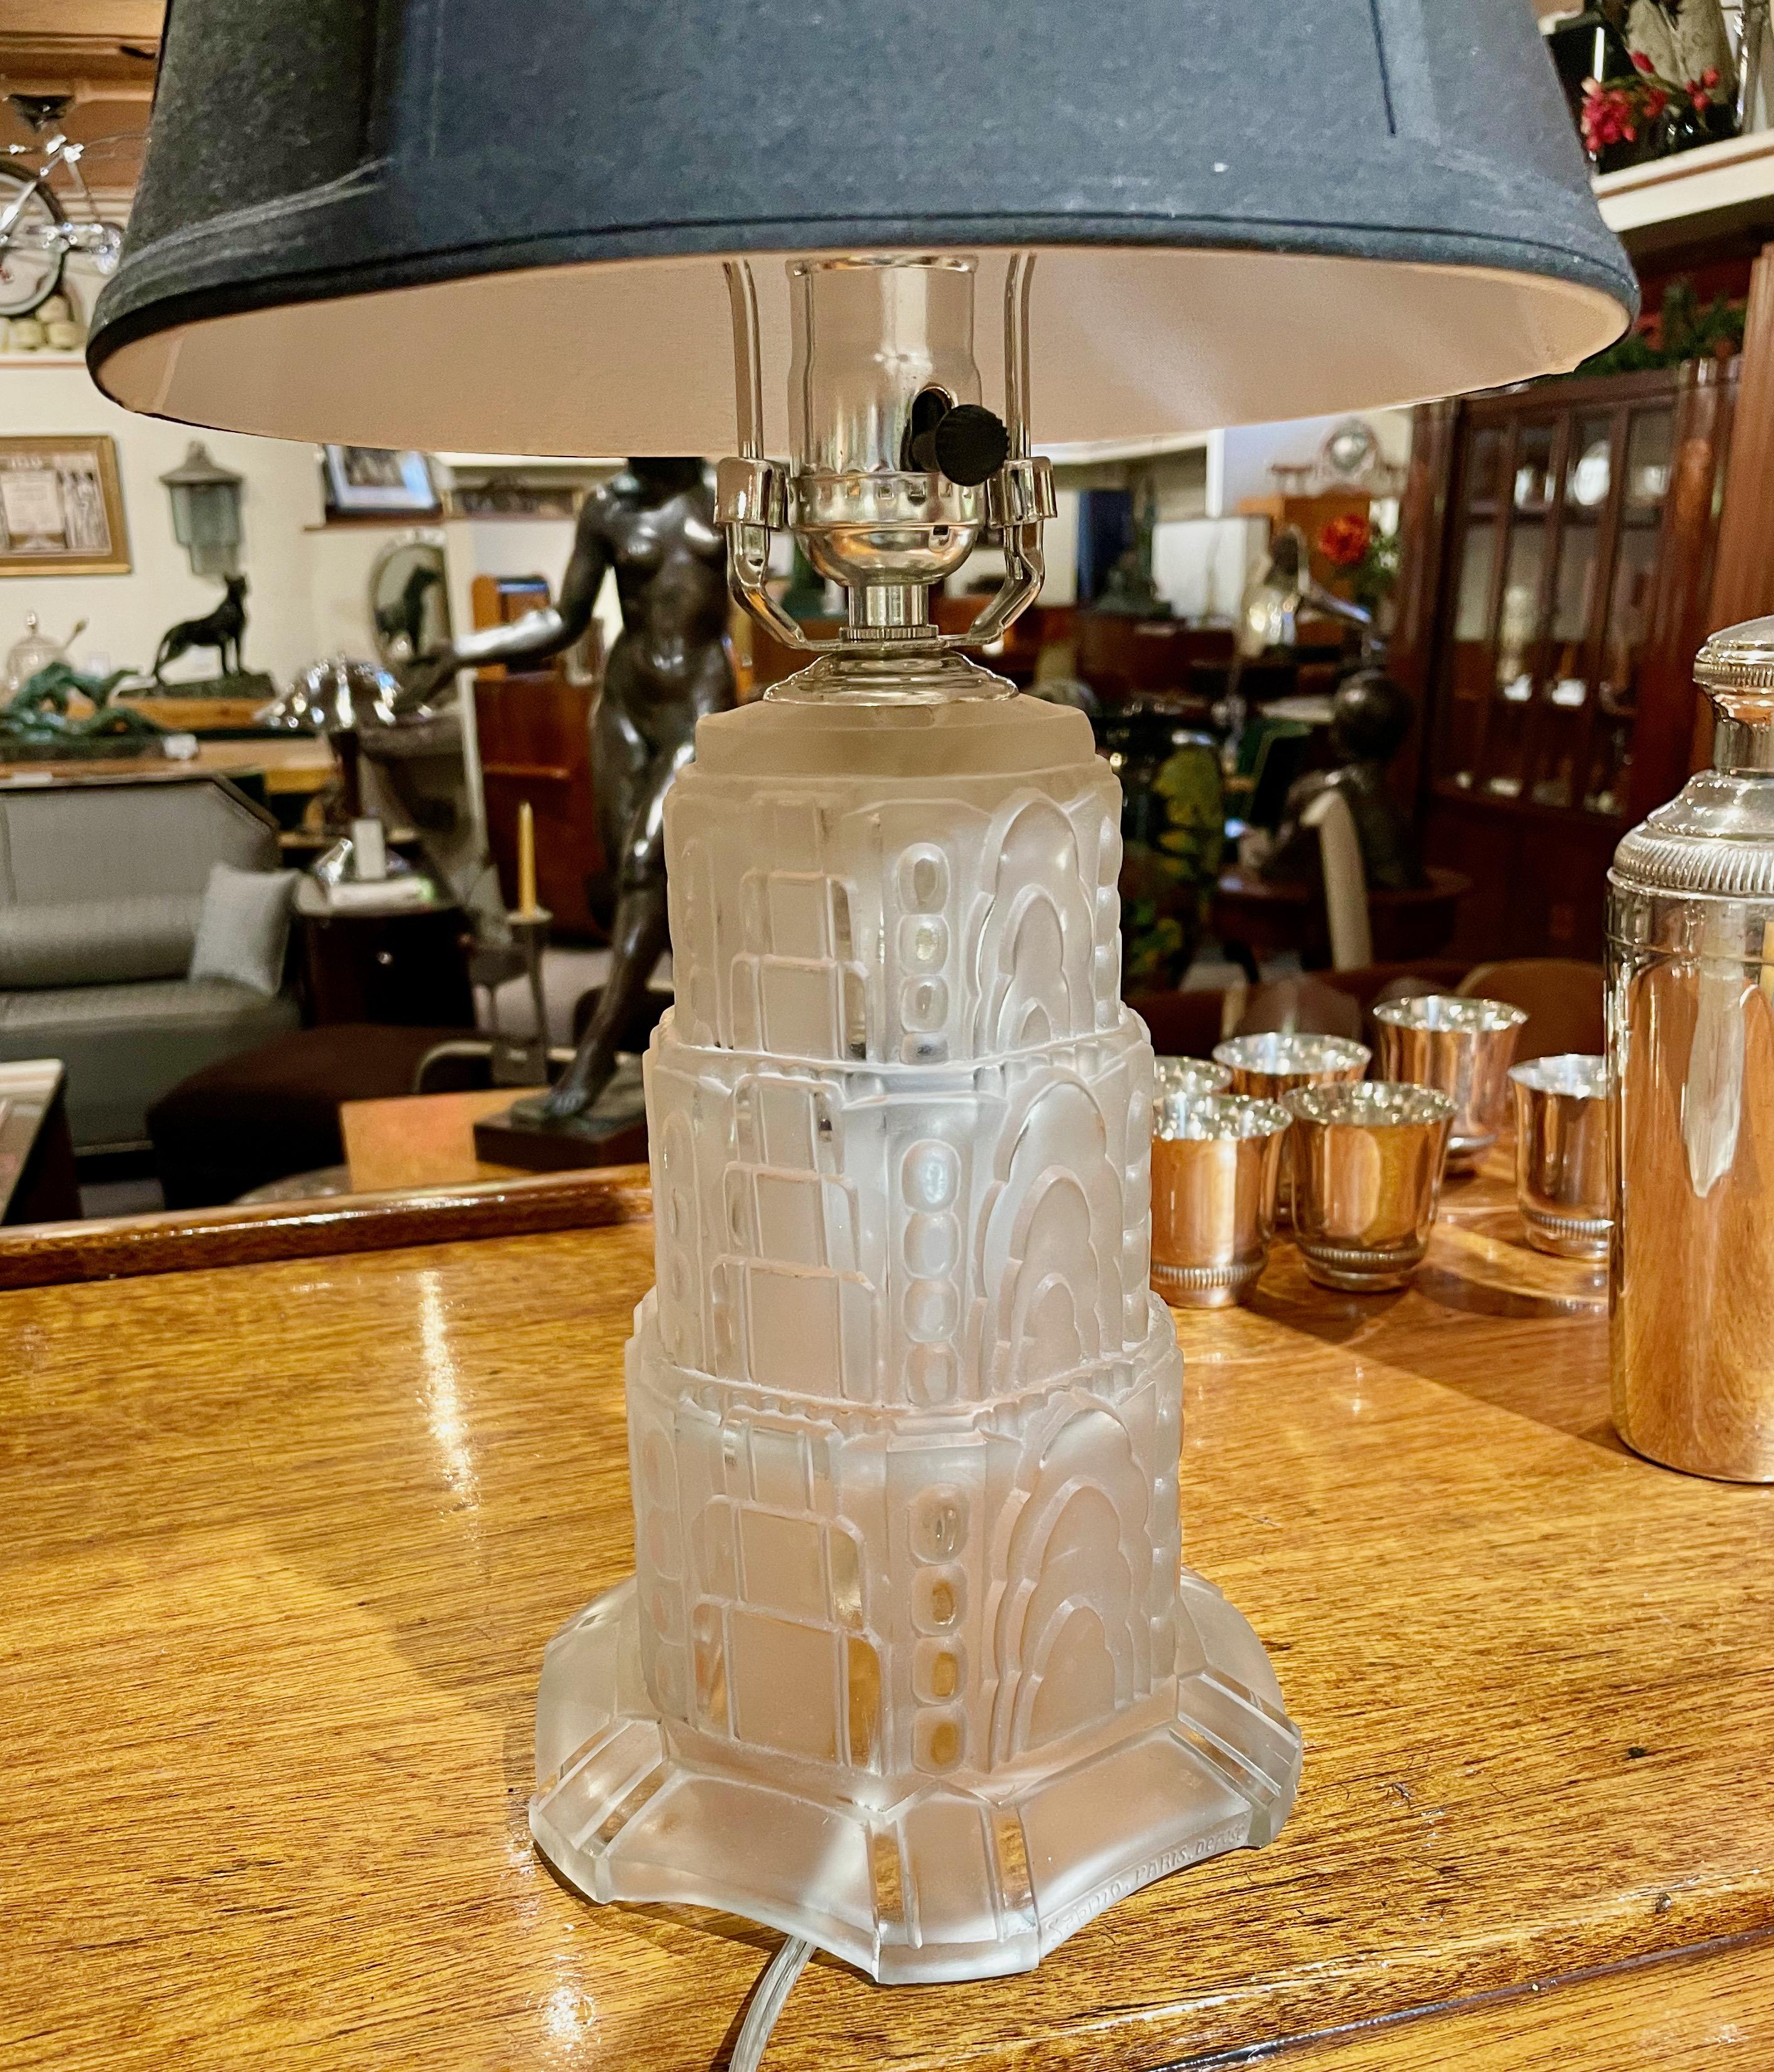 Sabino Art Deco stair-stepped water-fall glass table lamp. Perfectly rendered detailed glass, embossed with “Sabino Paris Depose” model #4670. A stunning lamp just re-wired with a 3-way switch allows you to light the top or bottom or both and new